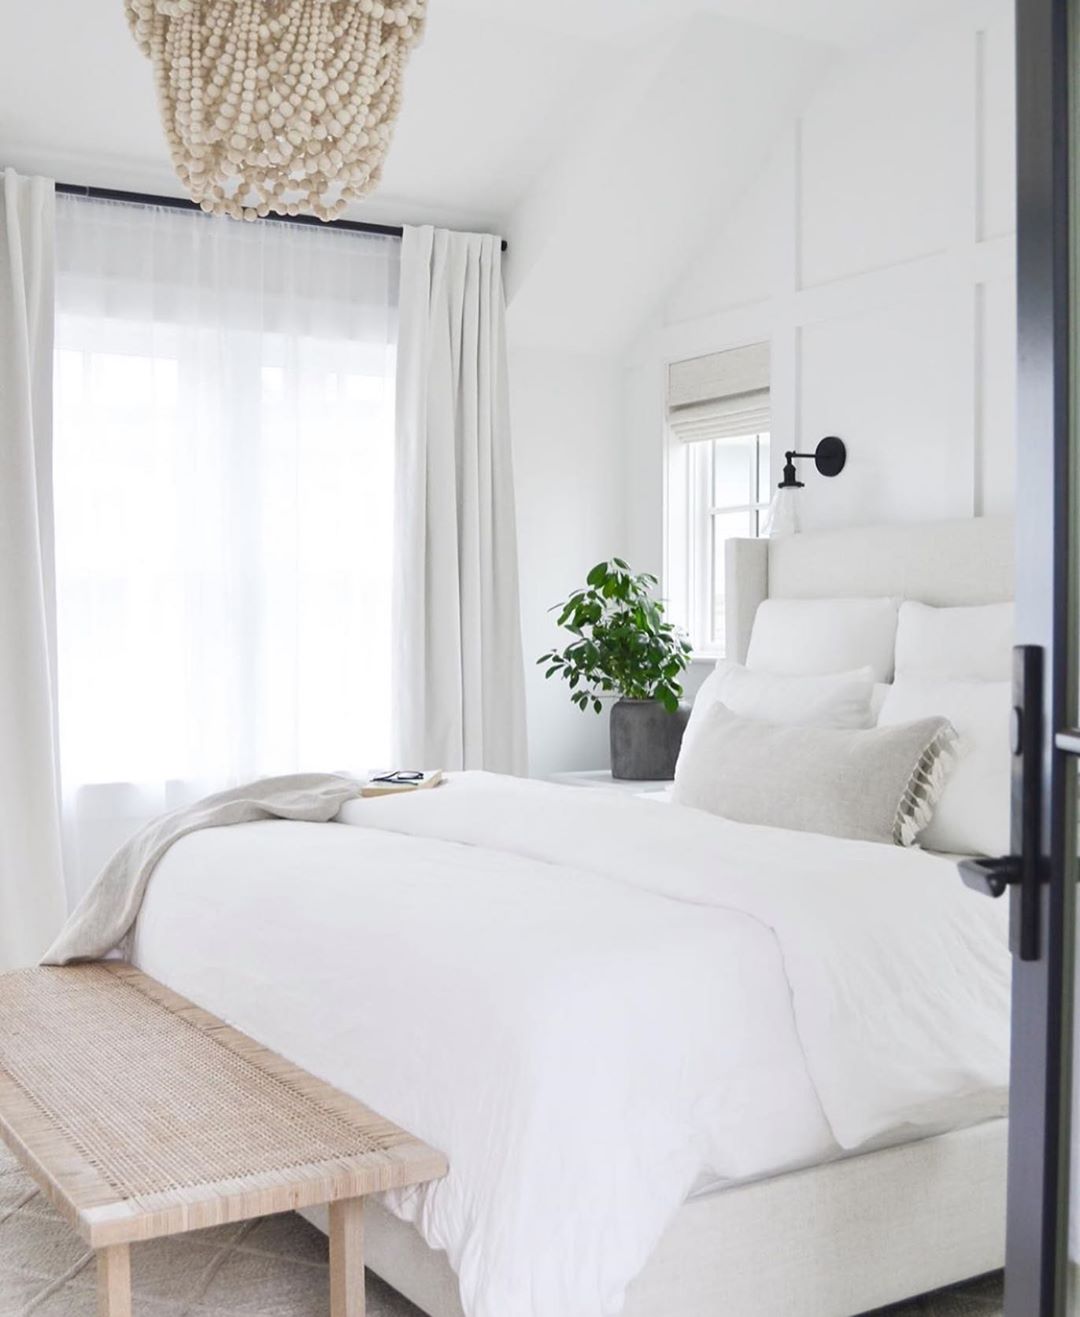 All White Bedroom with White Linens. Photo by Instagram user @simplifycohost